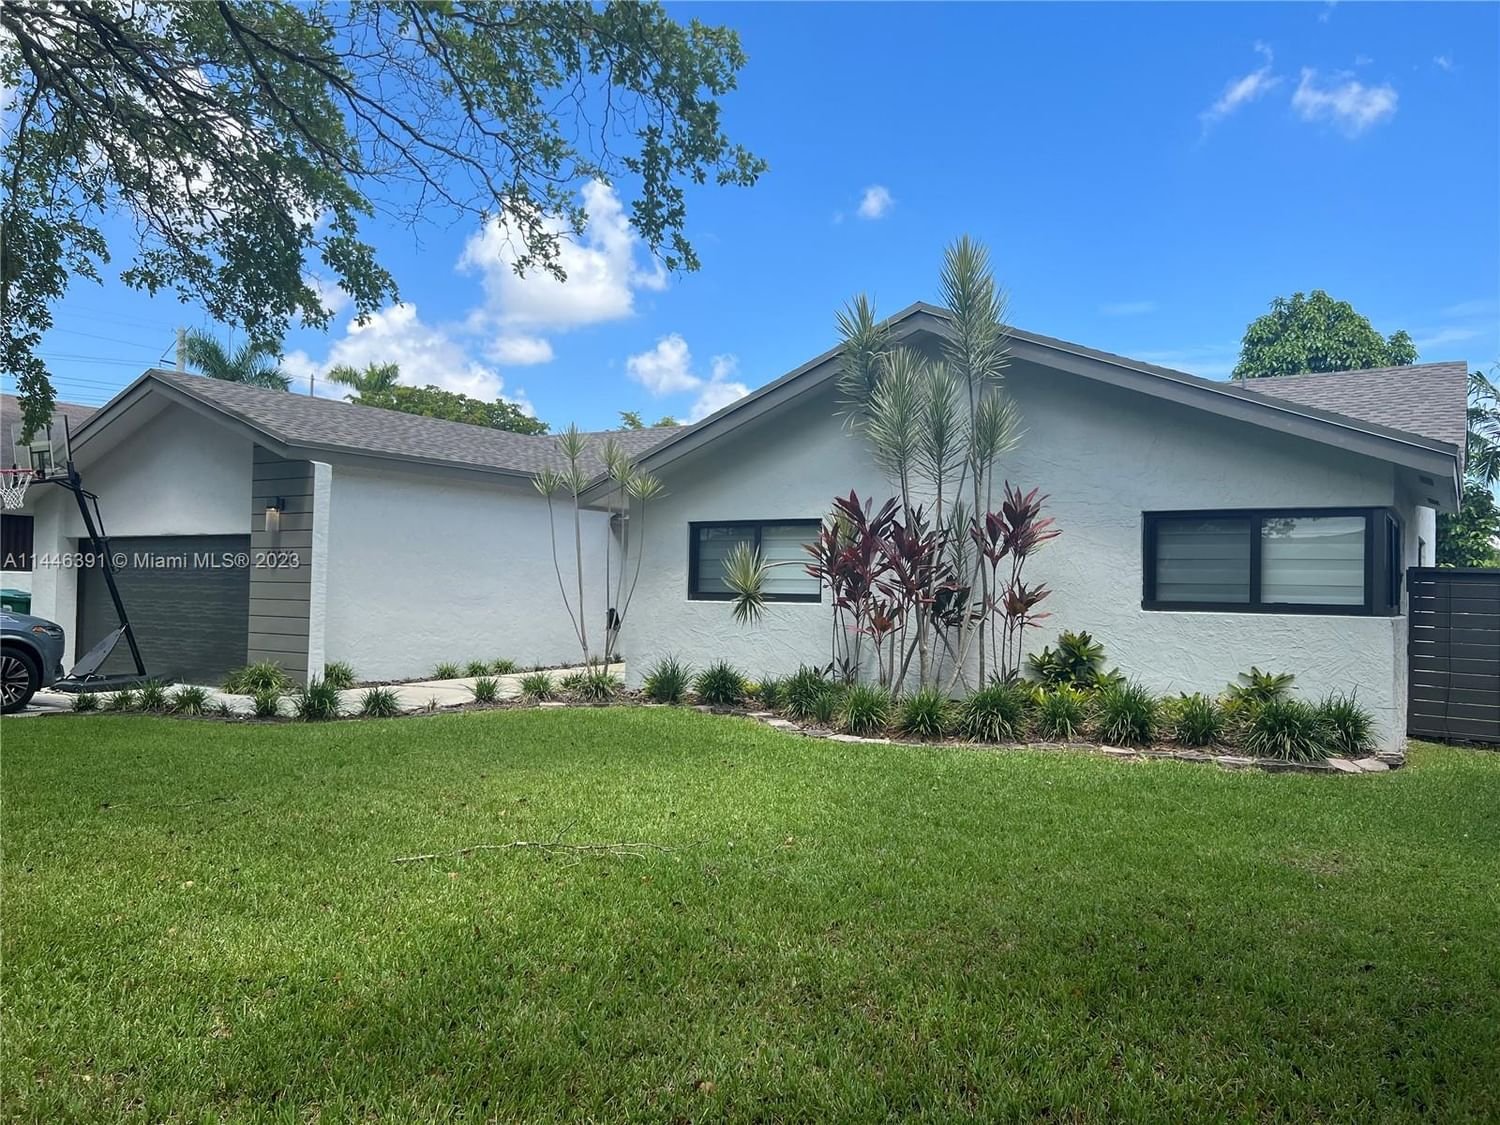 Real estate property located at 10241 91st St, Miami-Dade County, Miami, FL